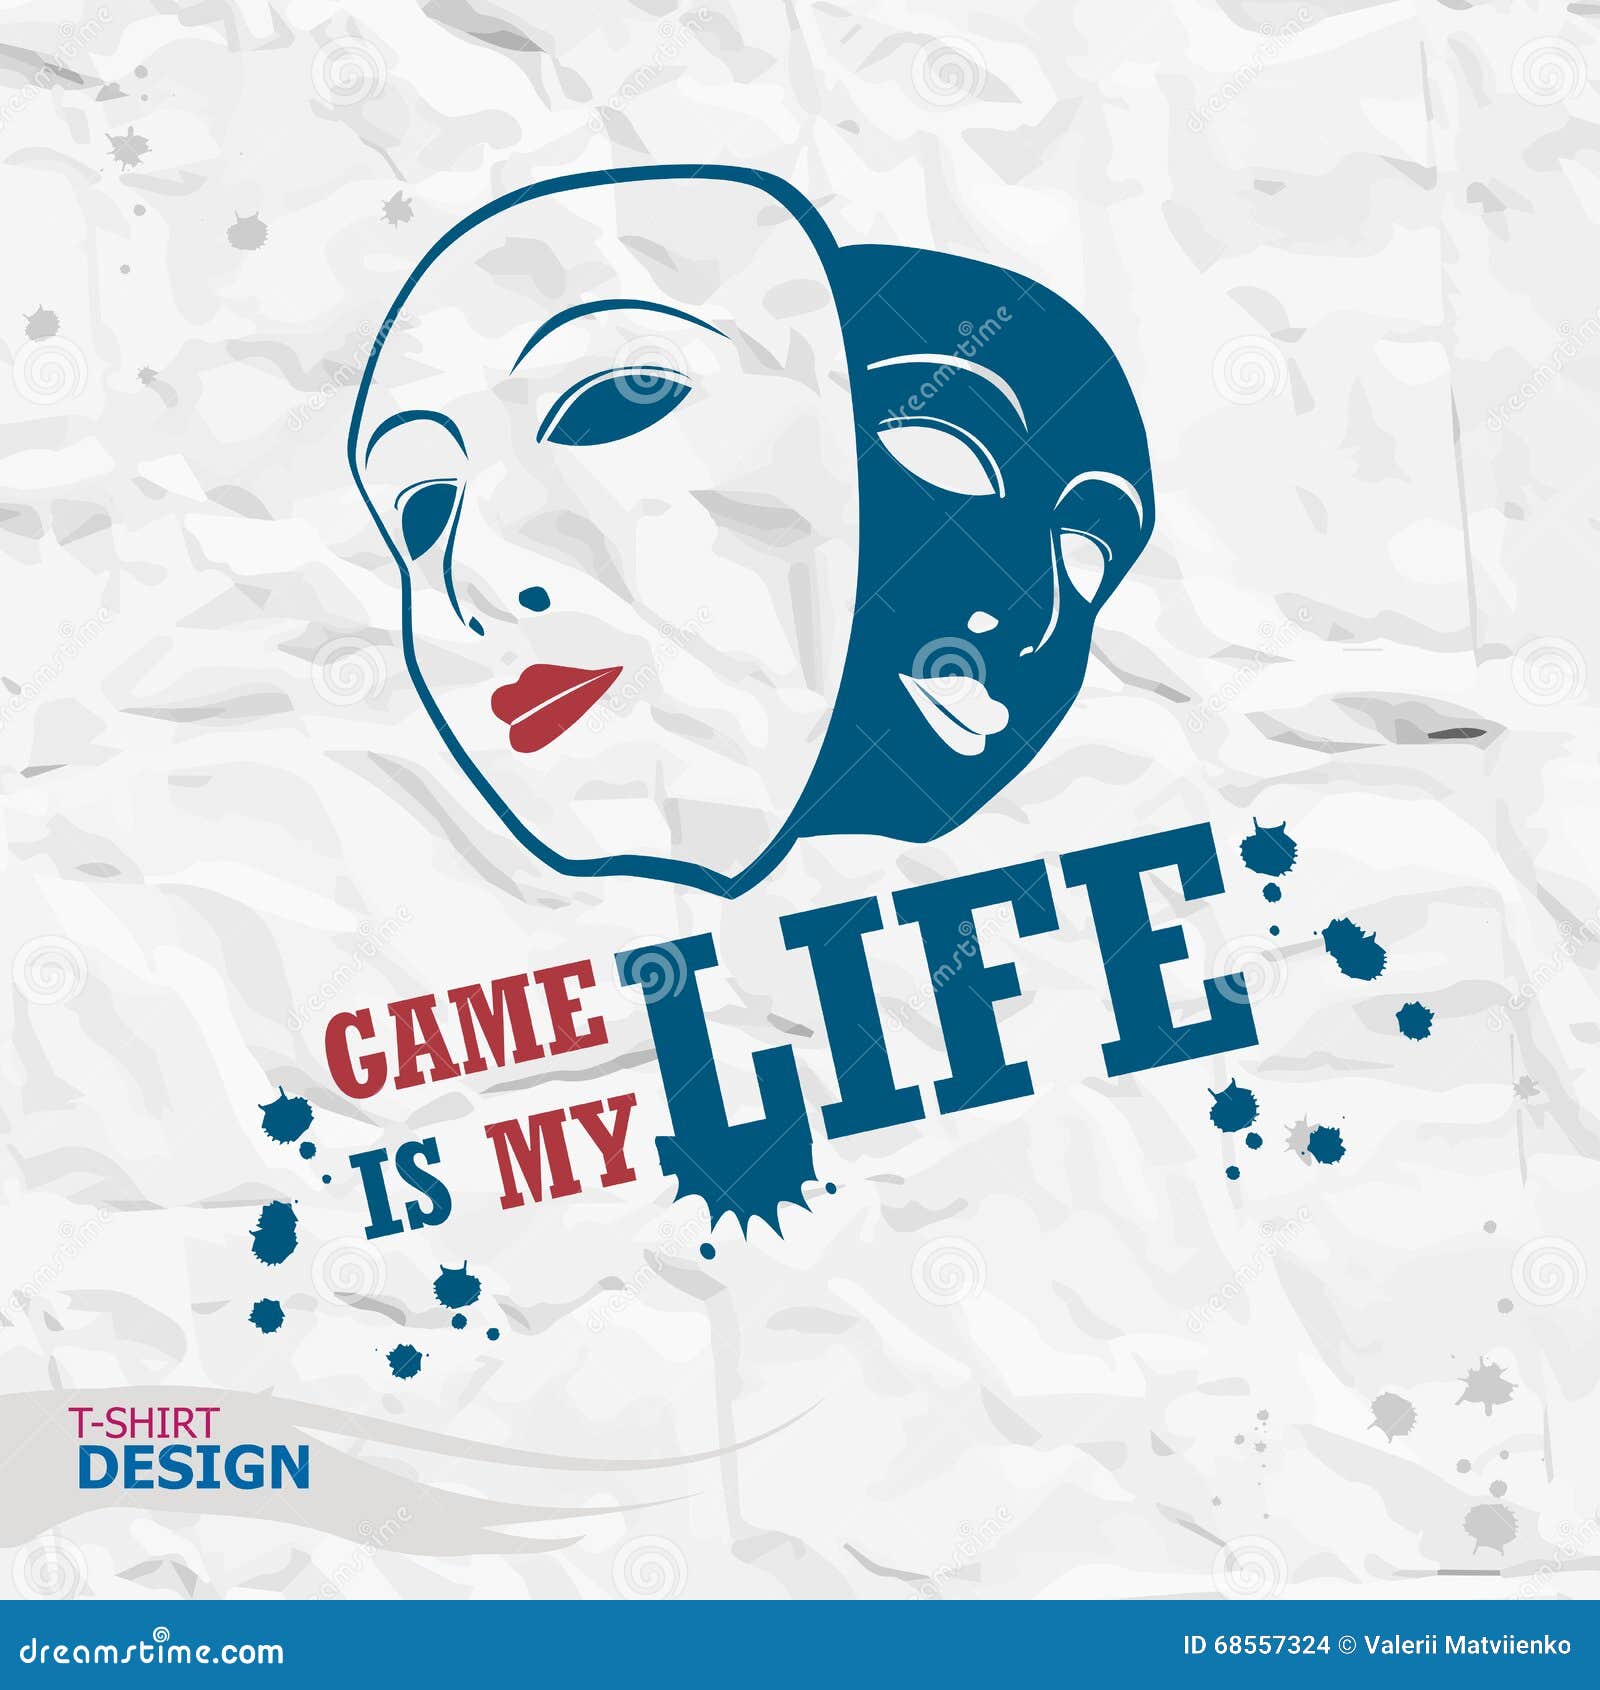 Geme Typography T Shirt Graphics Game Is My Life Stock Vector Illustration Of Masquerade Audience